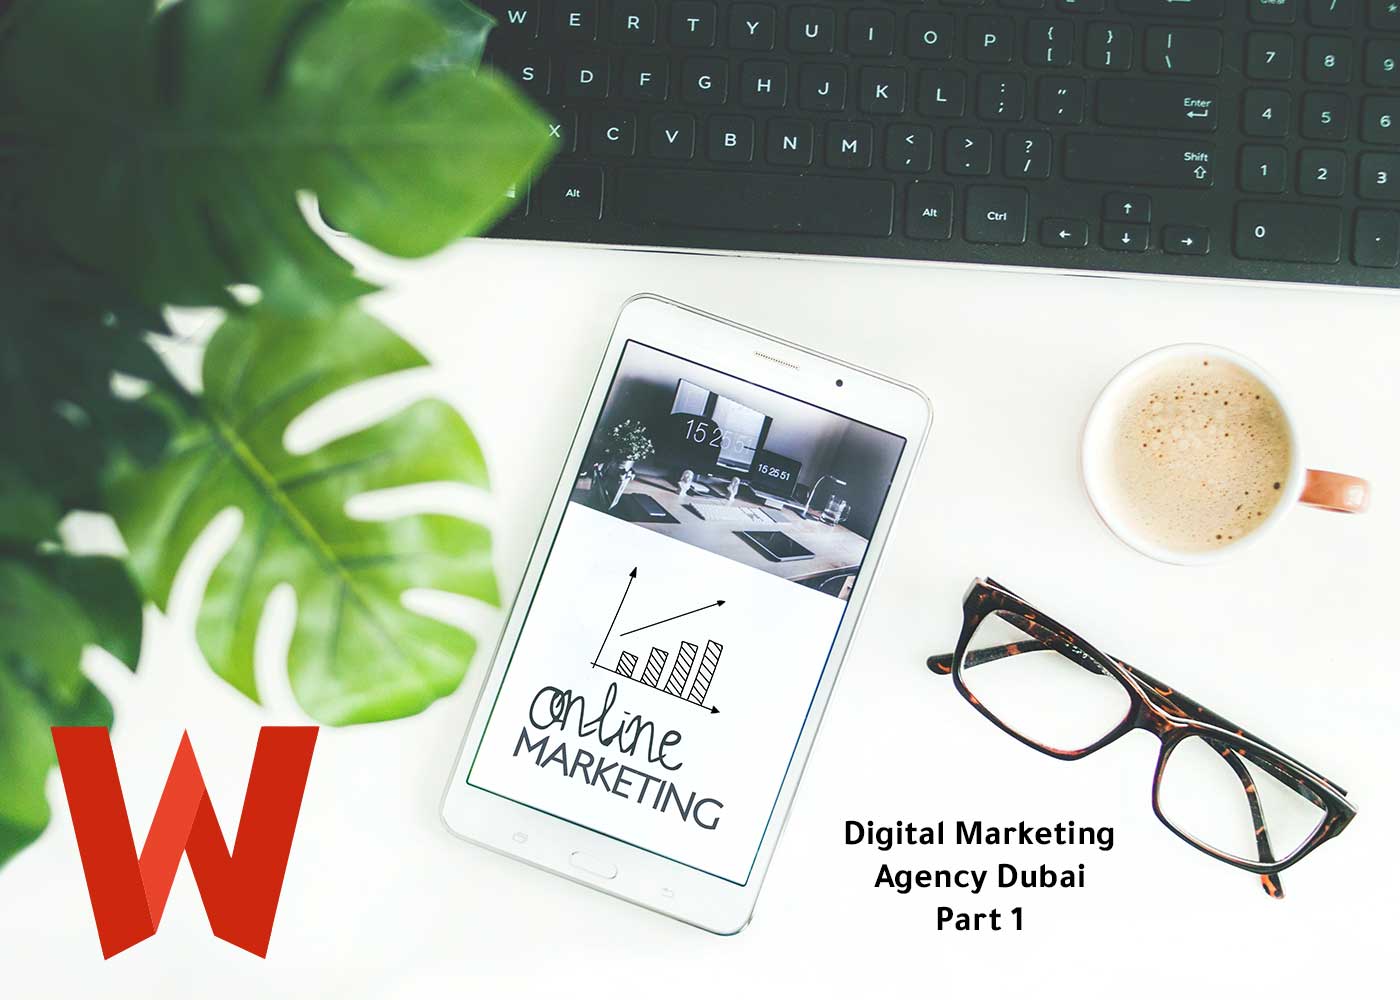 Digital Marketing Agency Dubai | What to look out for Part 1